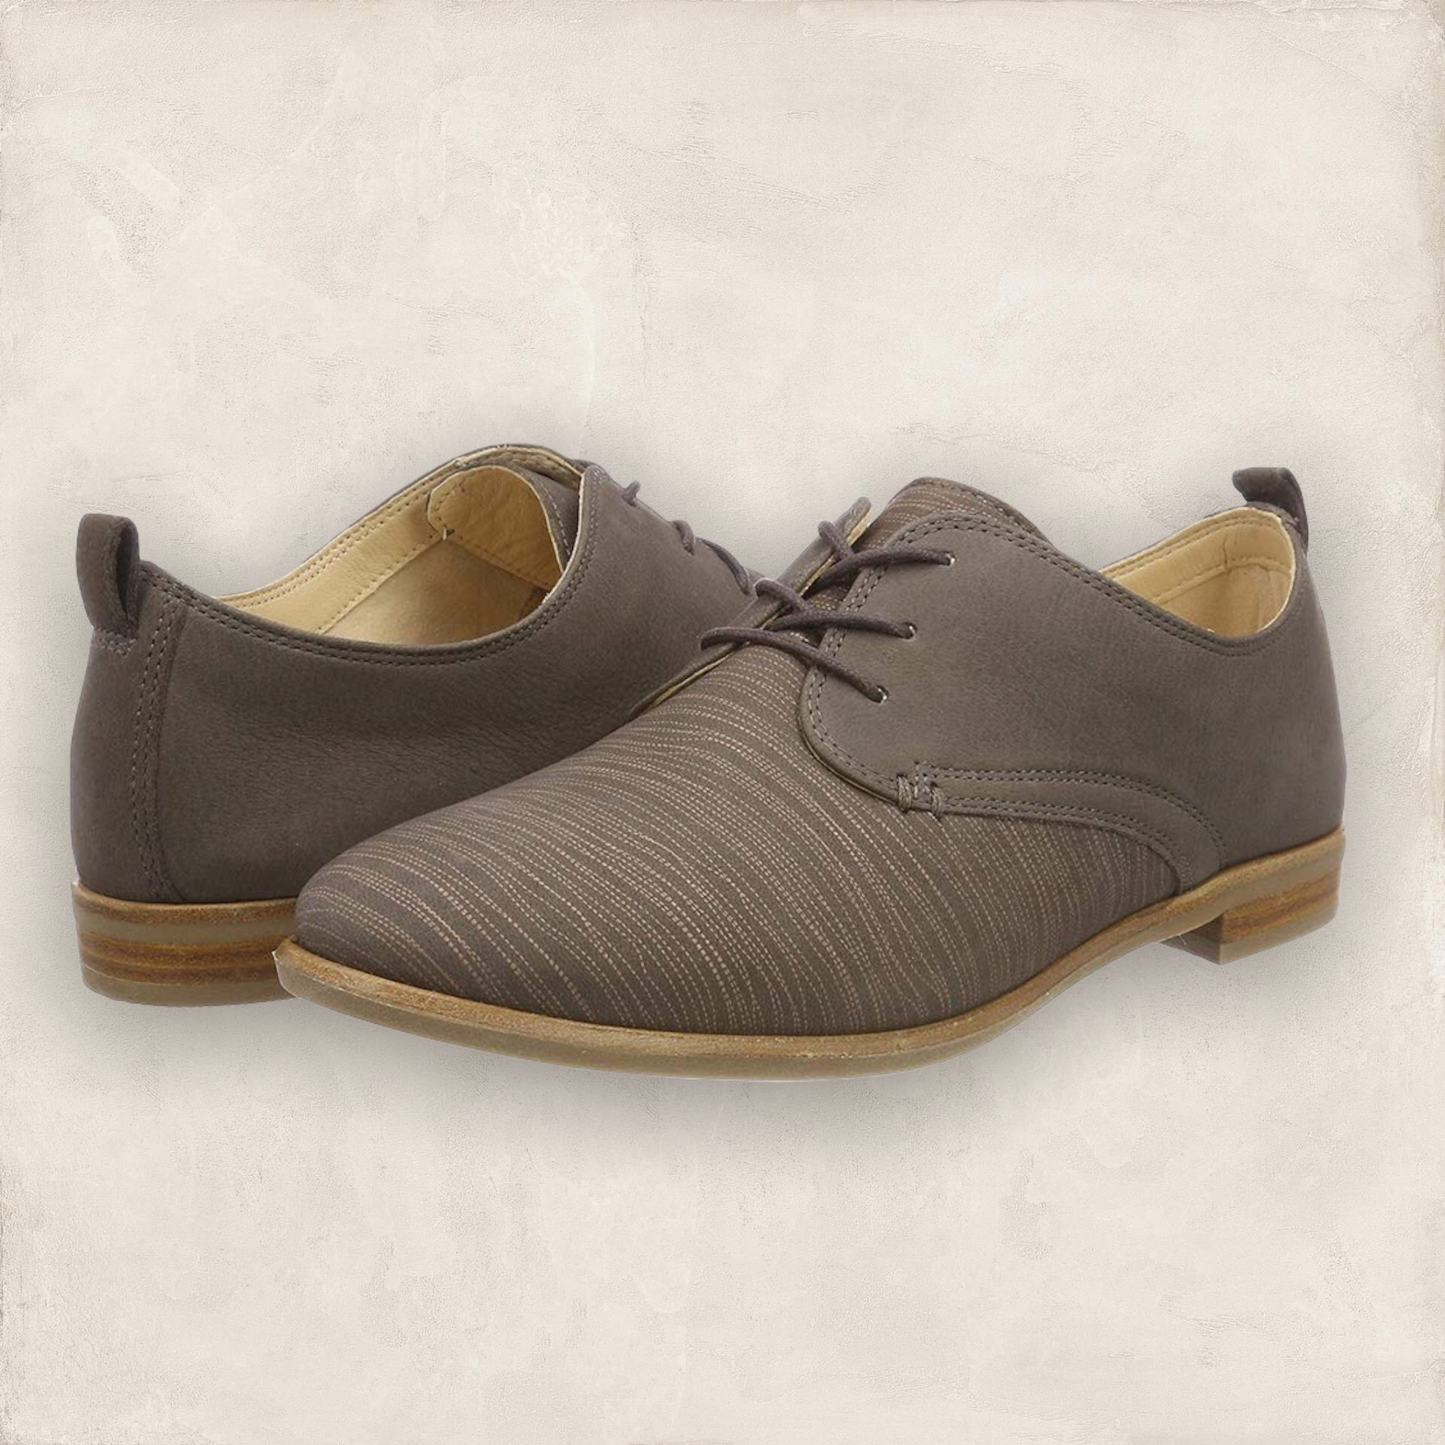 Clarks Alice May Women's Wide Lace-Up Shoes Taupe UK 5 Timeless Fashions